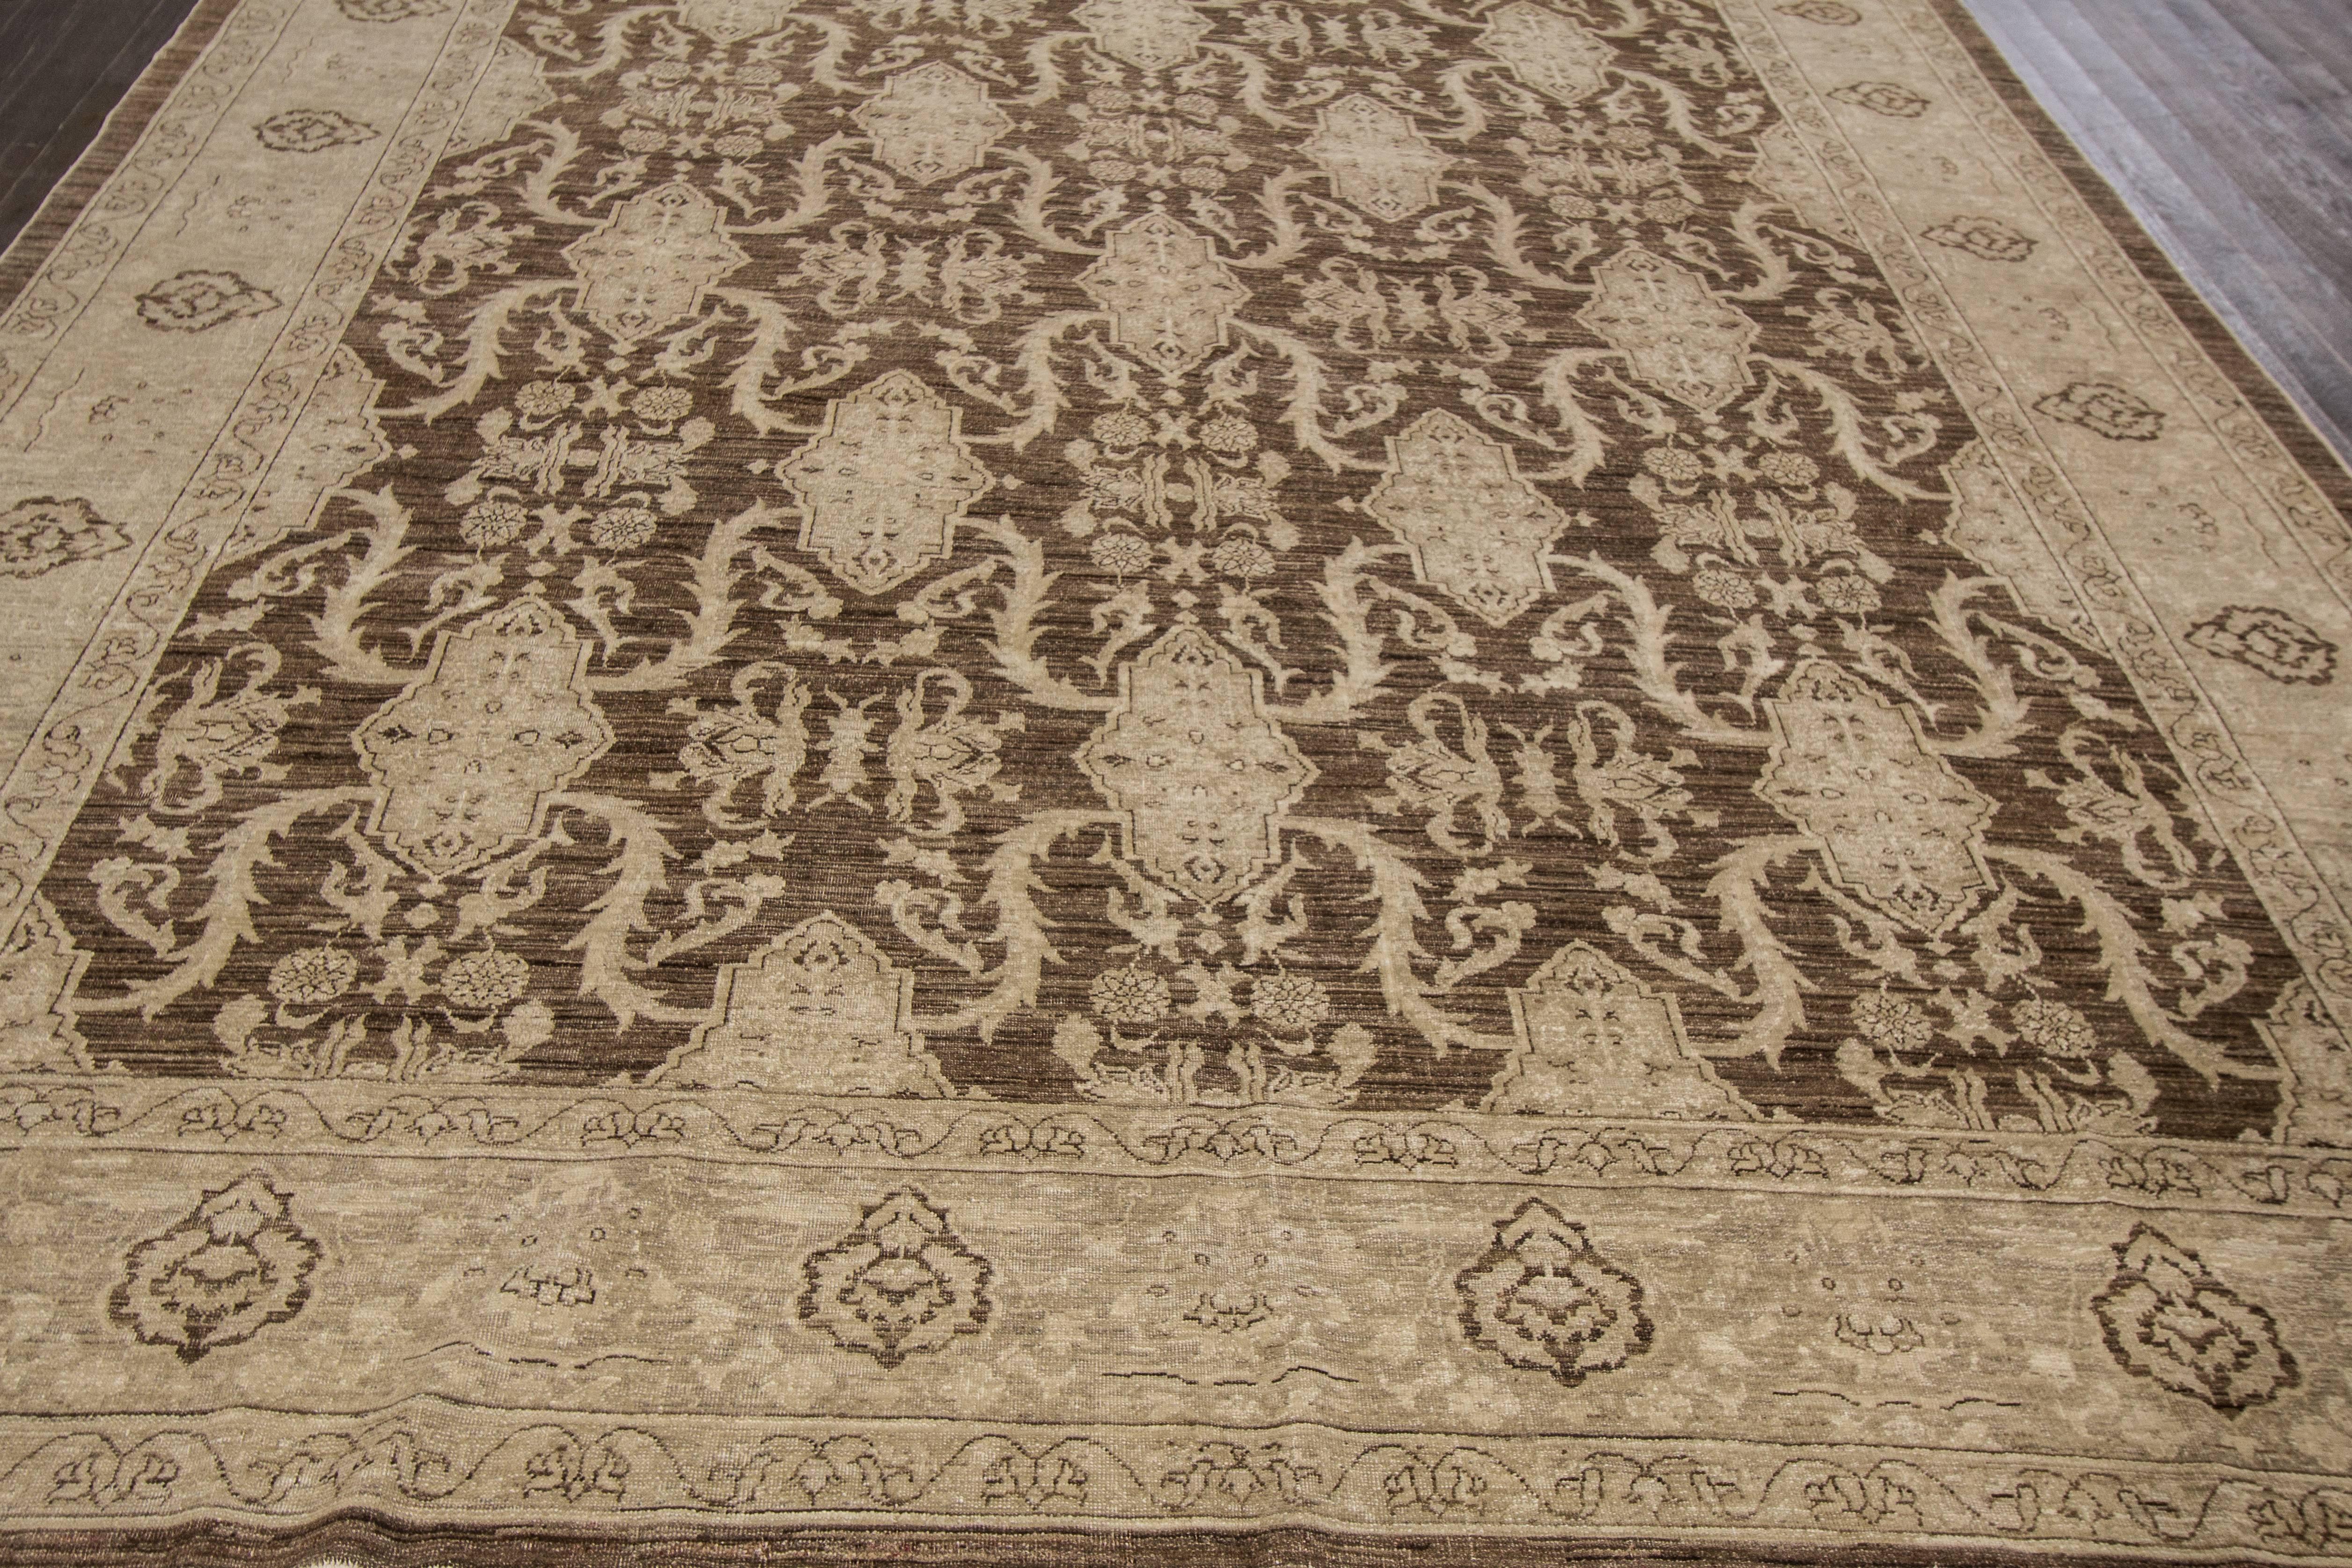 21st century contemporary (2000) Persian Peshawar rug with a dark brown field and lighter beige/tan pattern throughout. Measures 8.08x10.11.